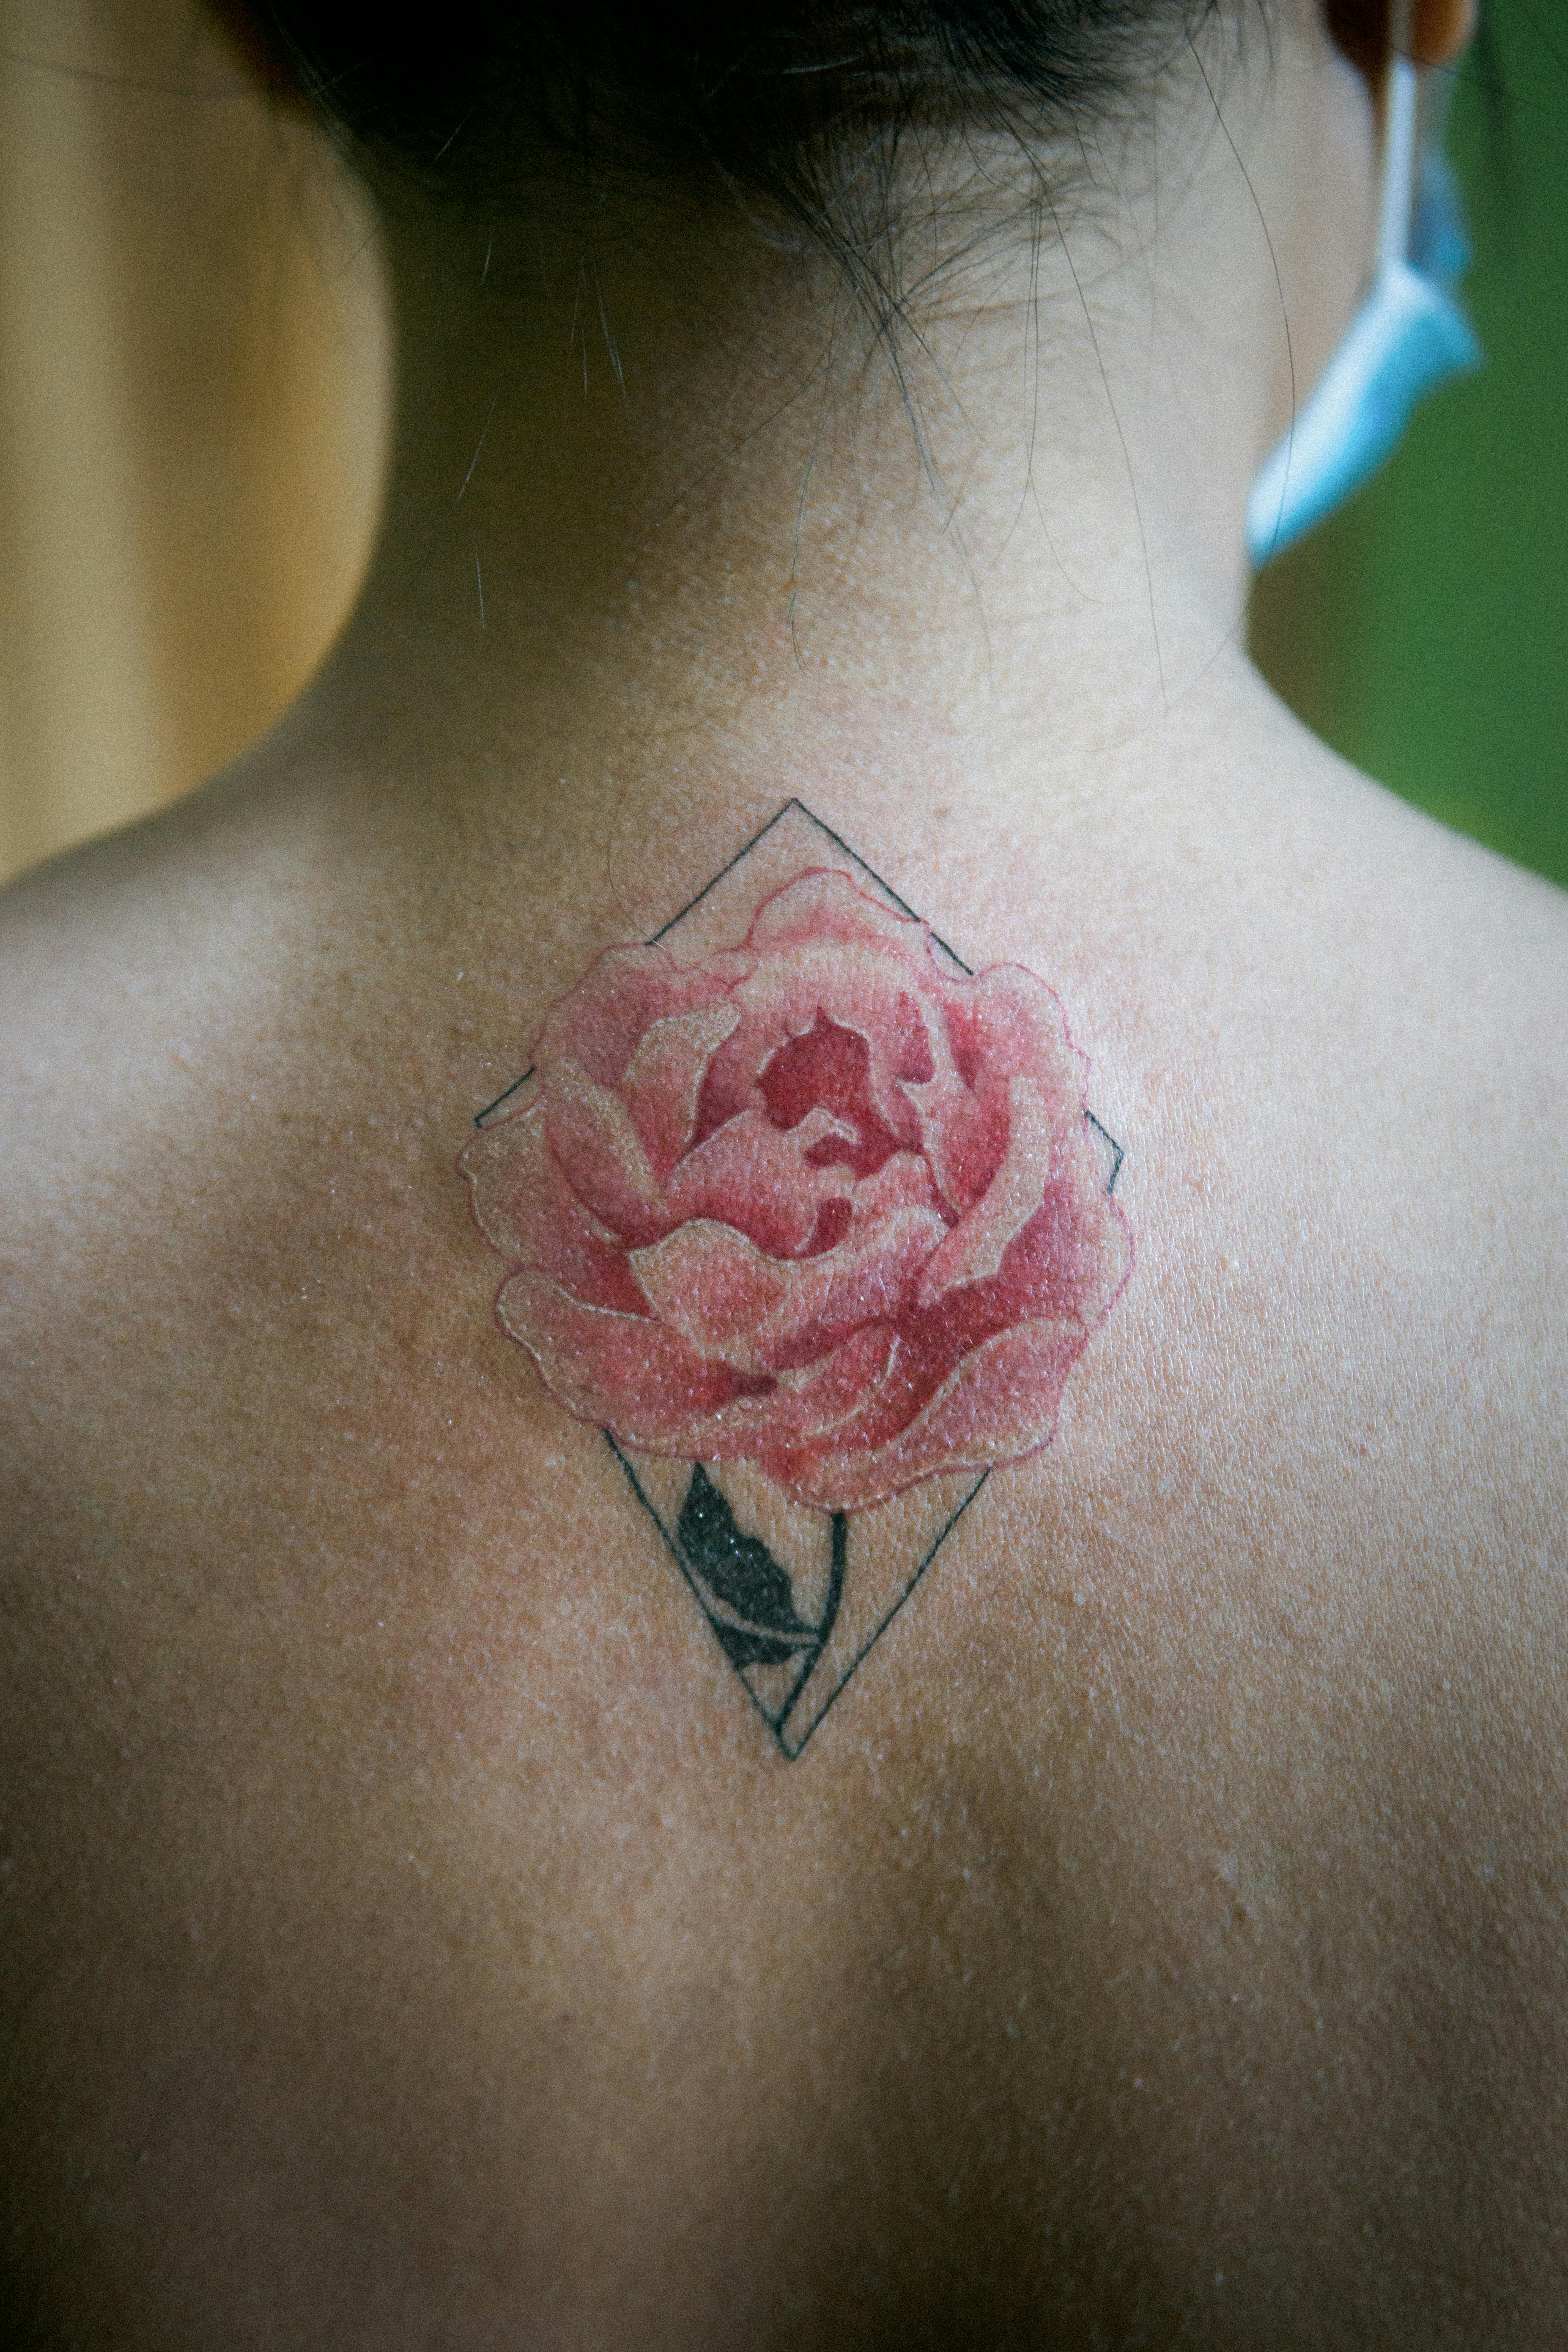 40 Rose Tattoos We Cant Stop Staring At